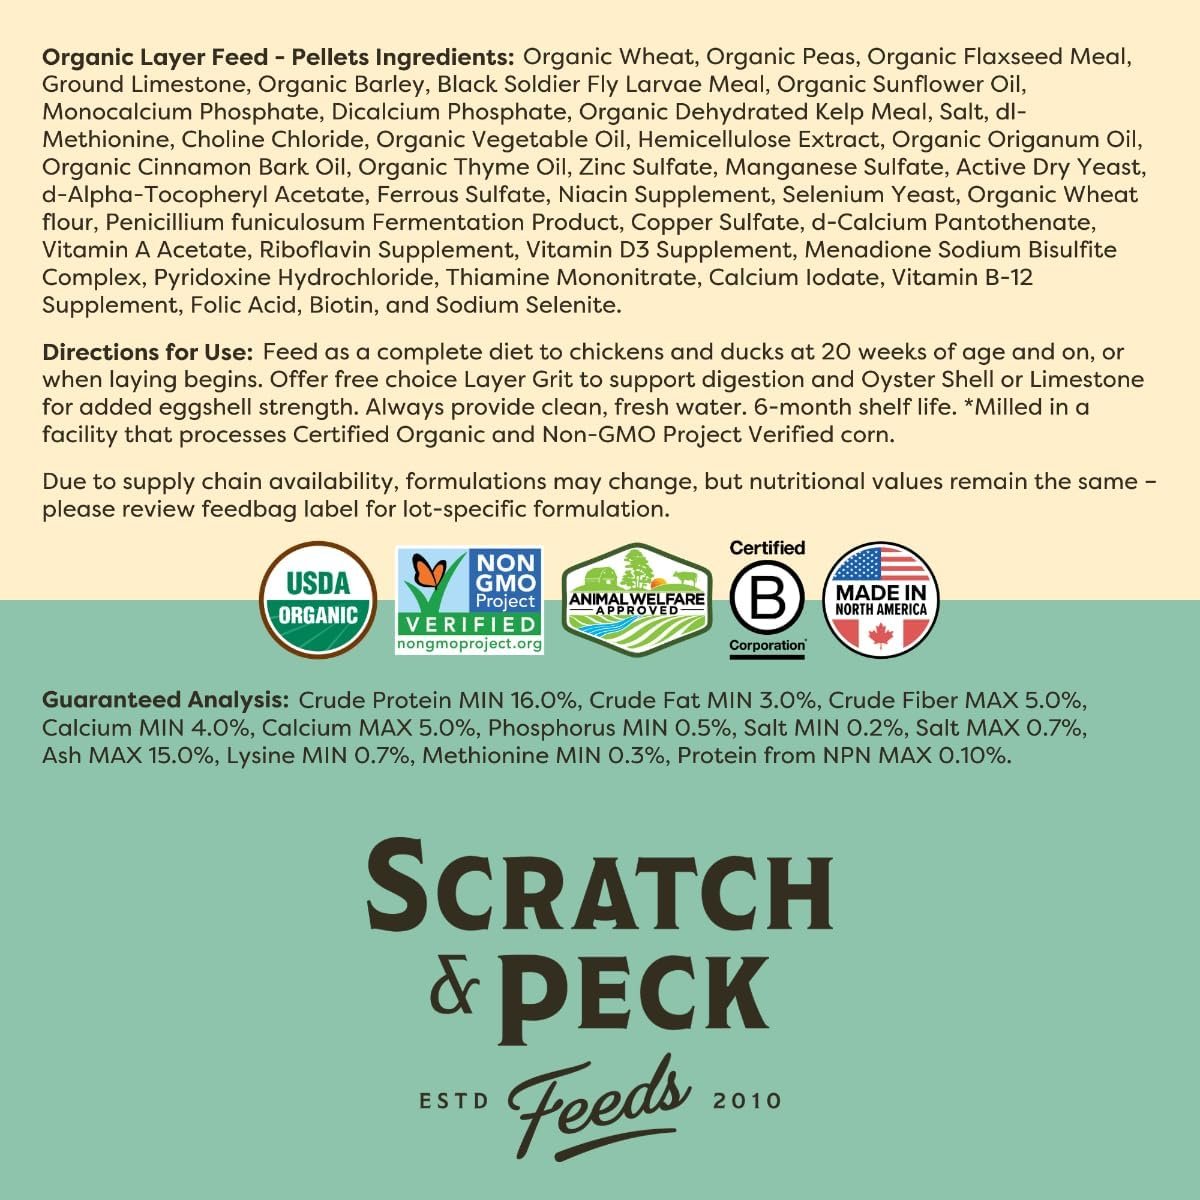 Scratch and Peck Feeds Organic Layer Pellets 16% - Premium Chicken and Duck Feed Formulated with Sustainable Grub Protein, Vitamins, and Minerals